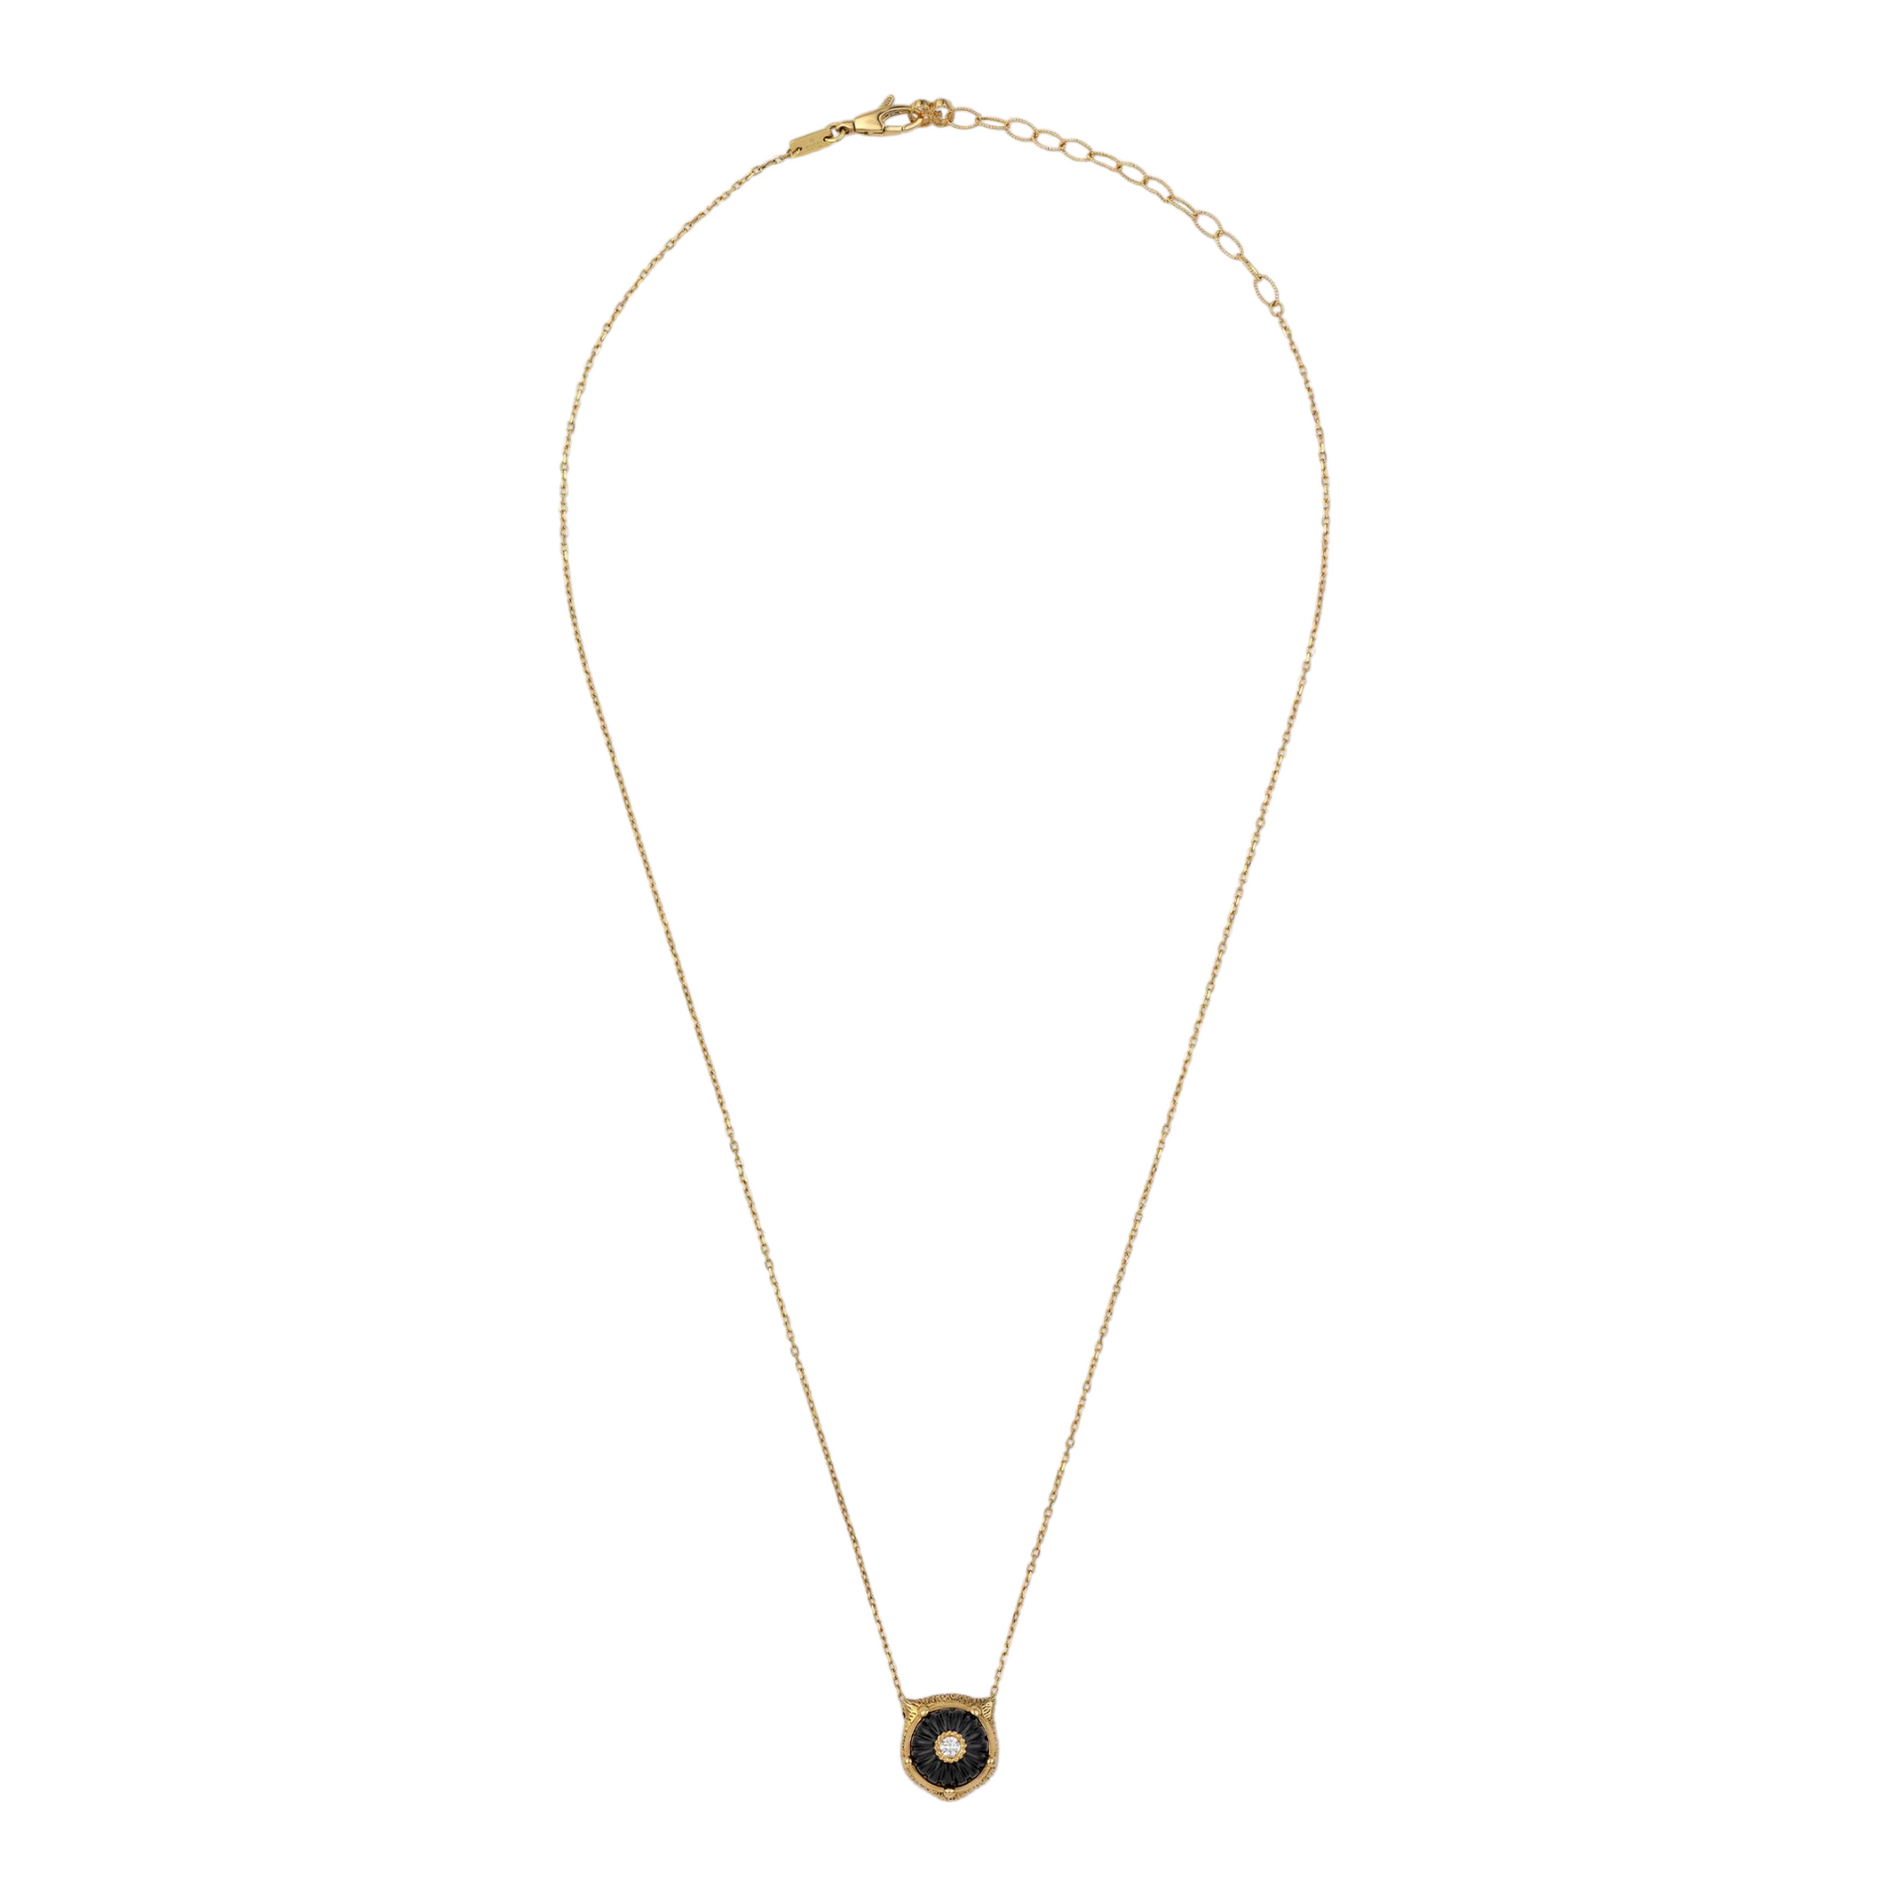 Gucci Le Marché des Merveilles Necklace in 18k Yellow Gold with Onyx and Diamonds - Orsini Jewellers NZ